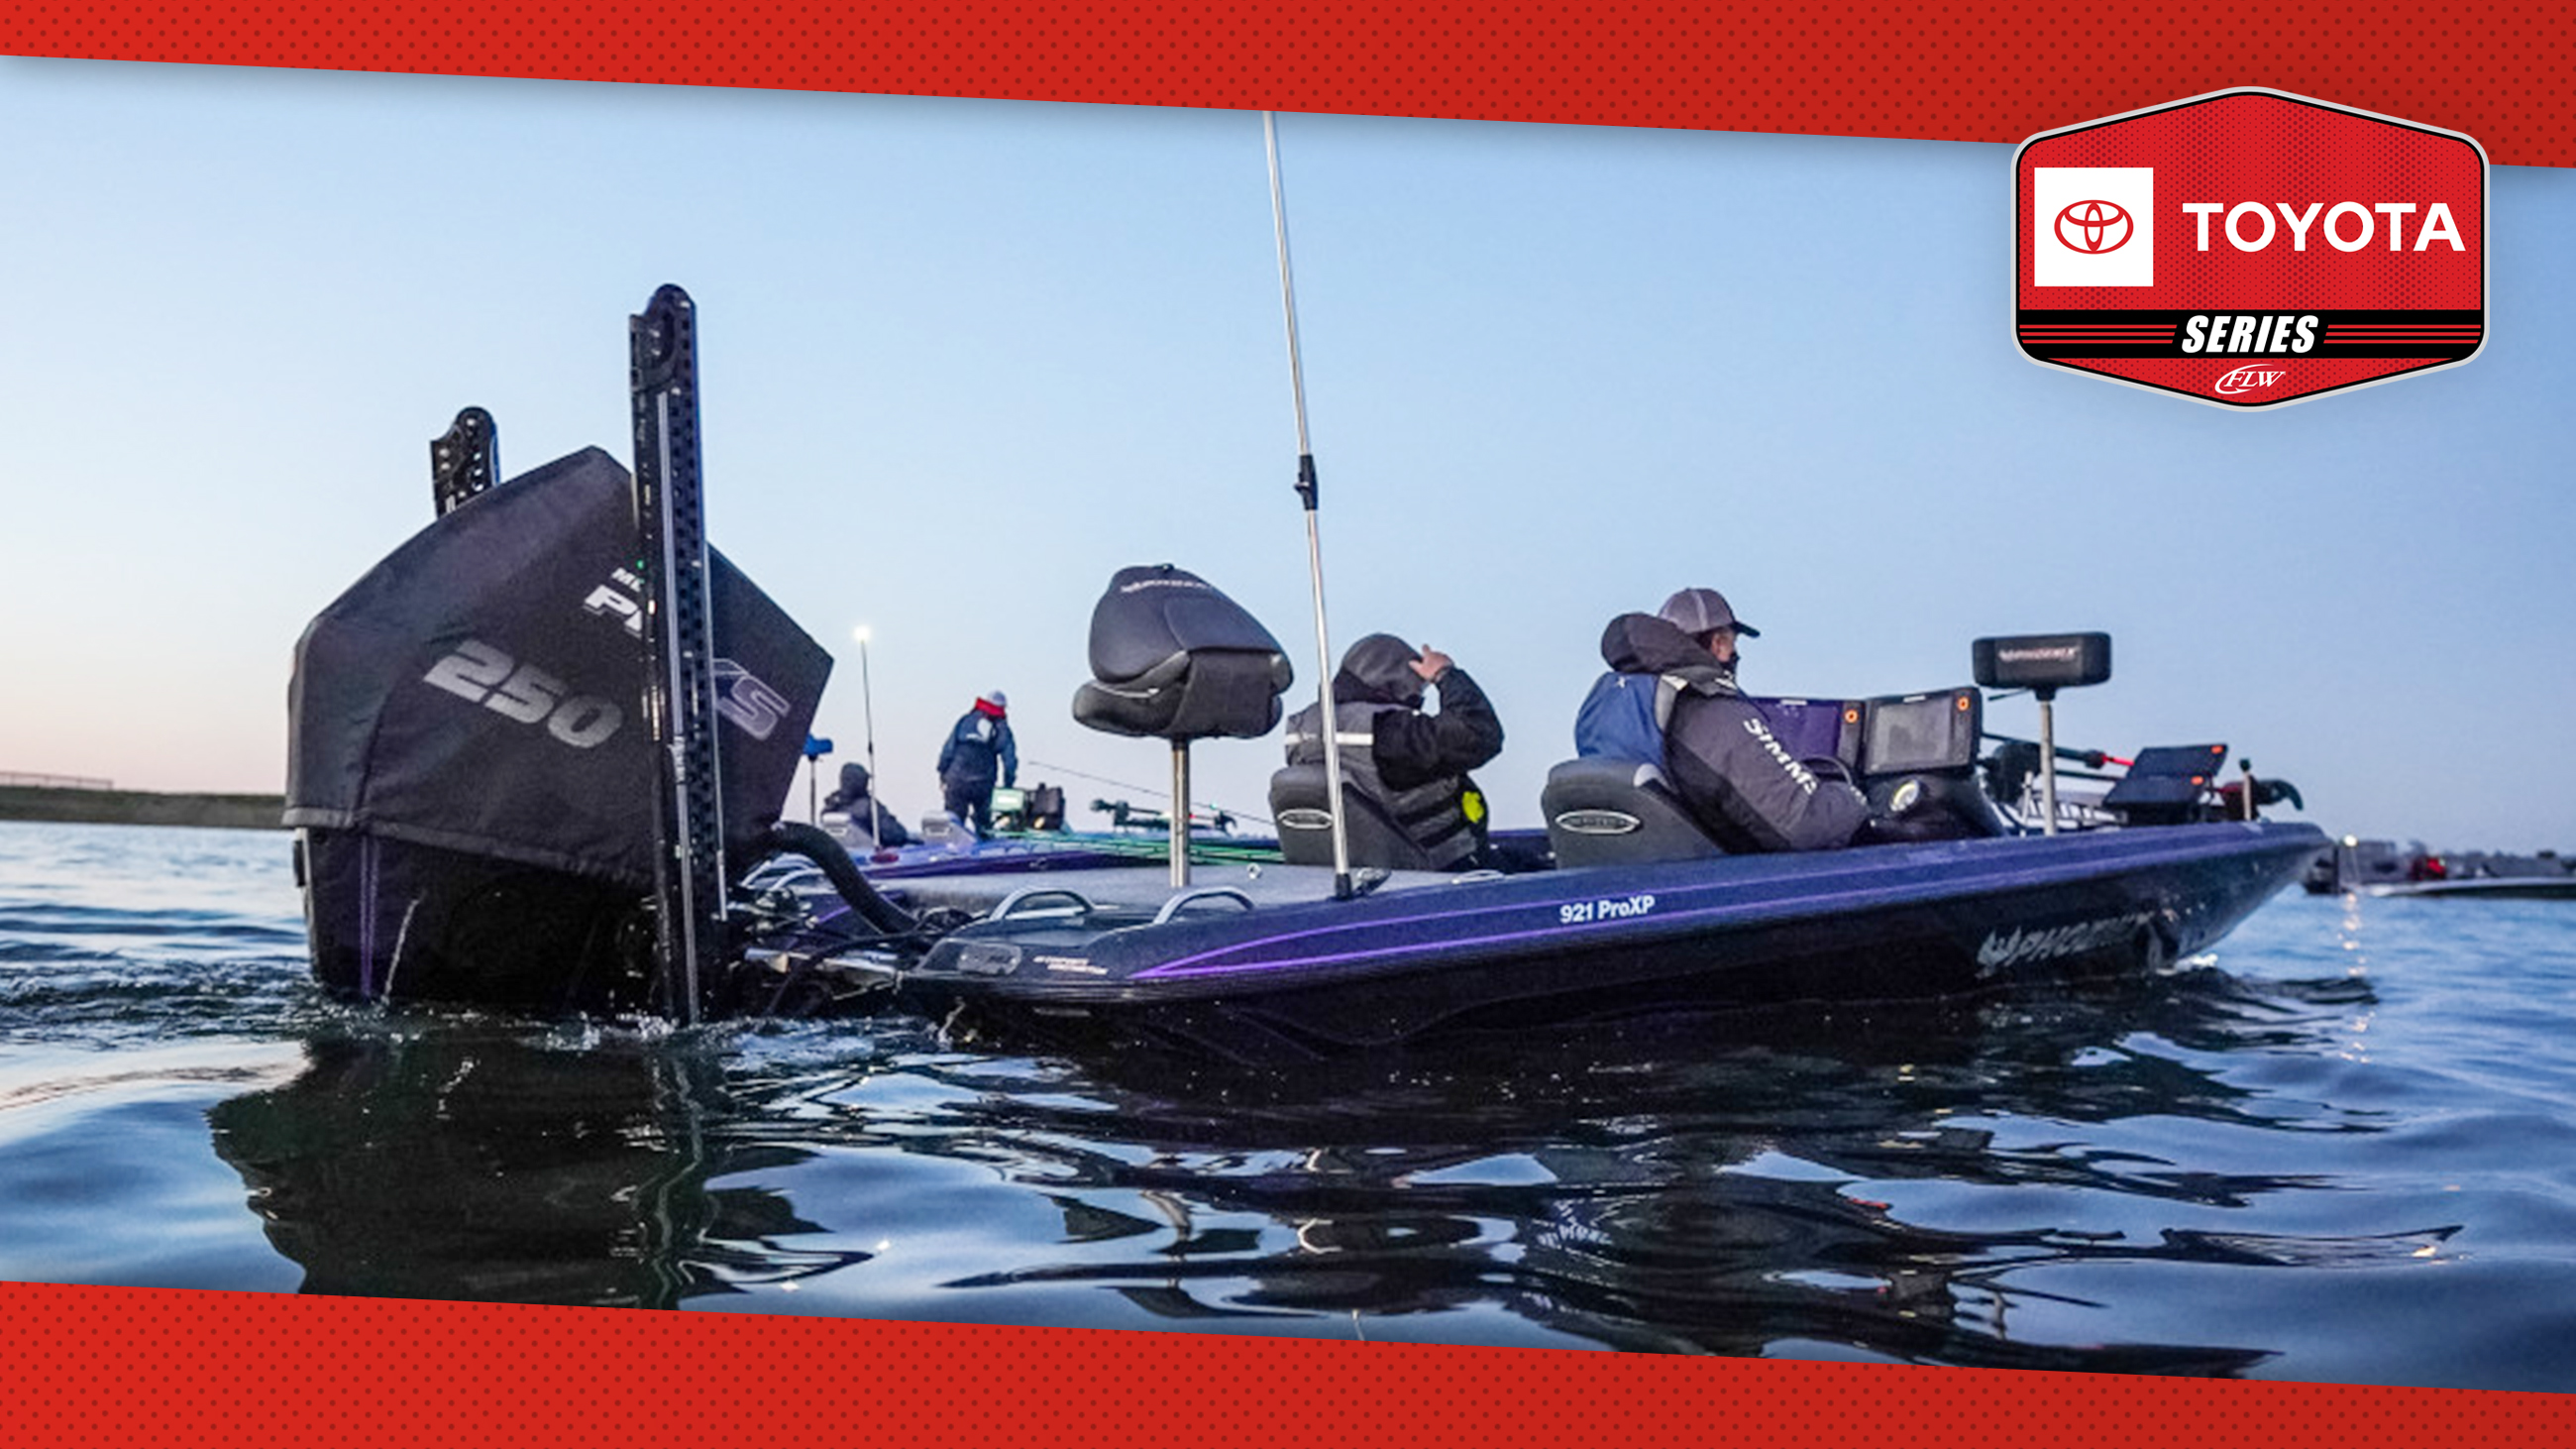 Toyota Series: Best Value in Fishing - Major League Fishing